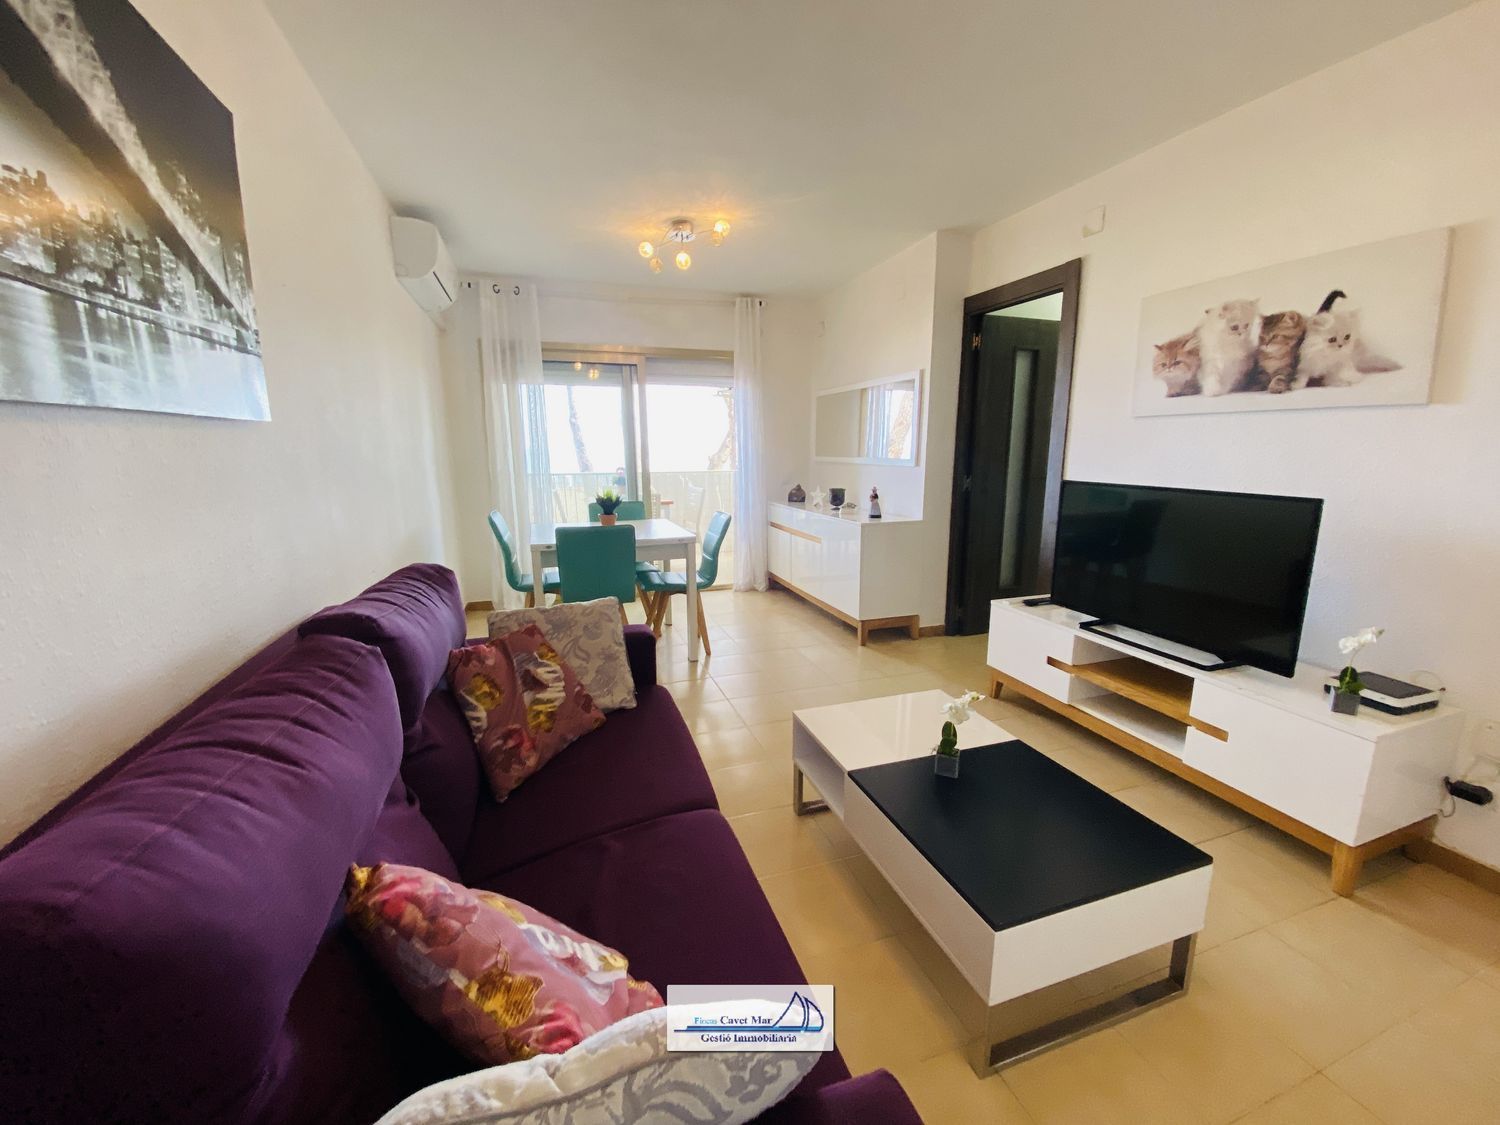 Apartment for sale on the seafront in Avinguda Diputació, in Cambrils